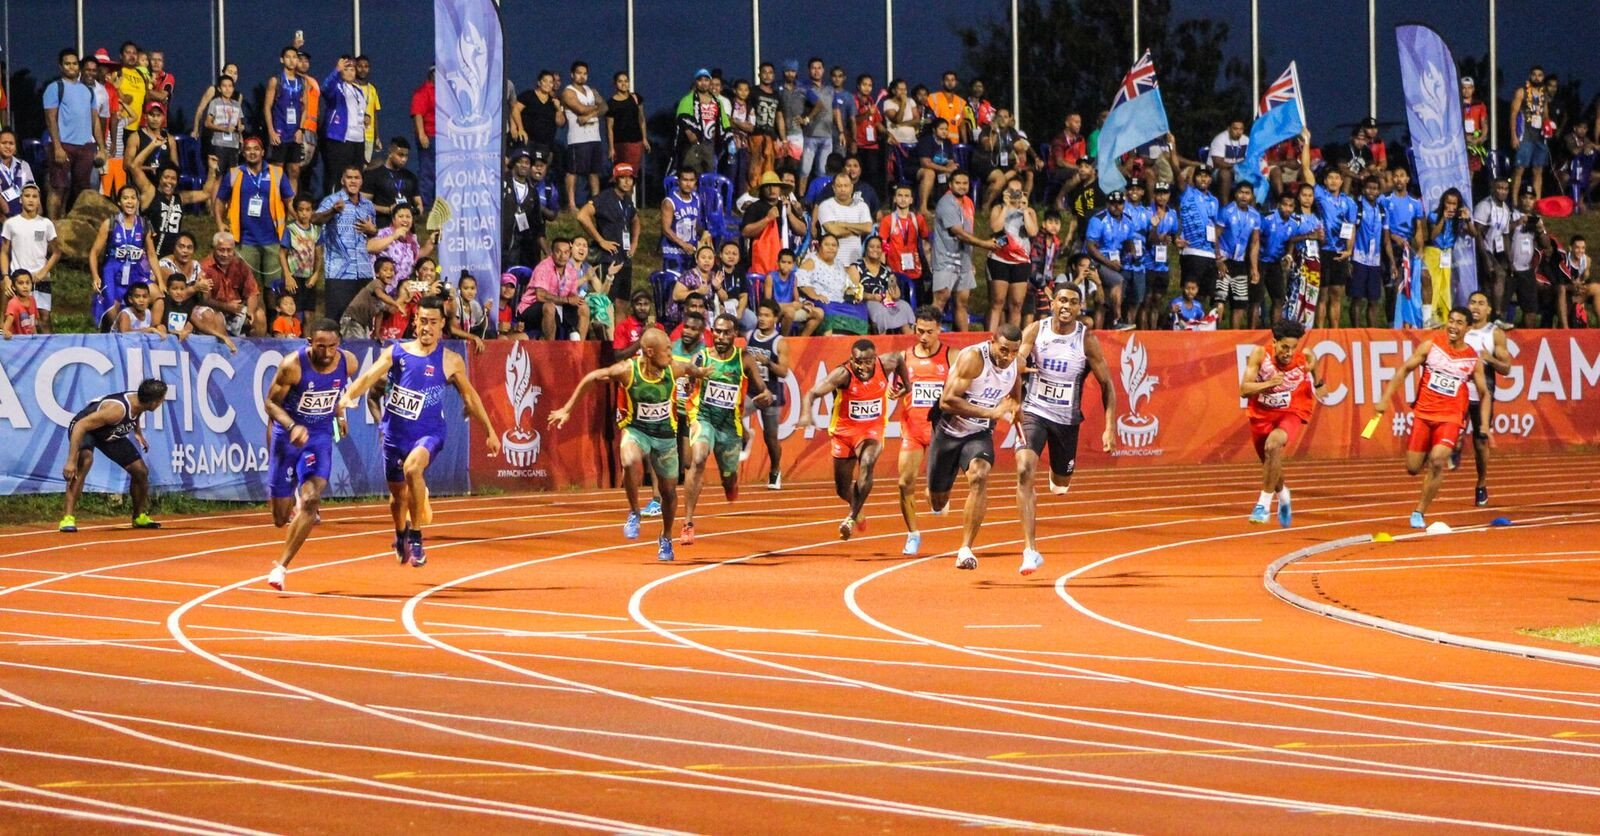 The battle for medals at Samoa 2019 has proved fierce ©Pacific Games News Service